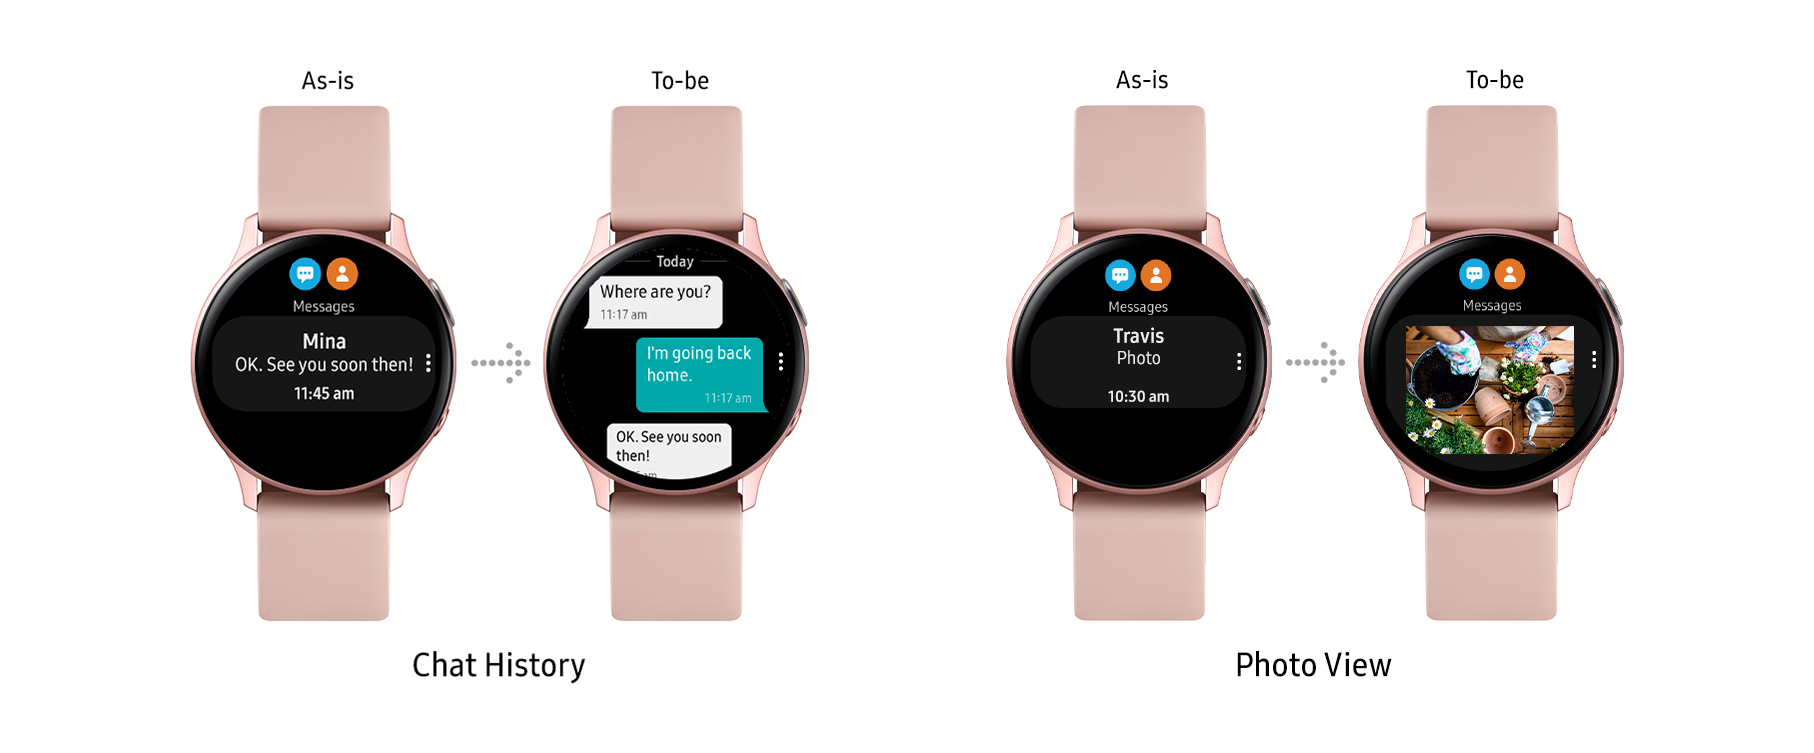 Galaxy Watch Active2's chat history and photo view feature.